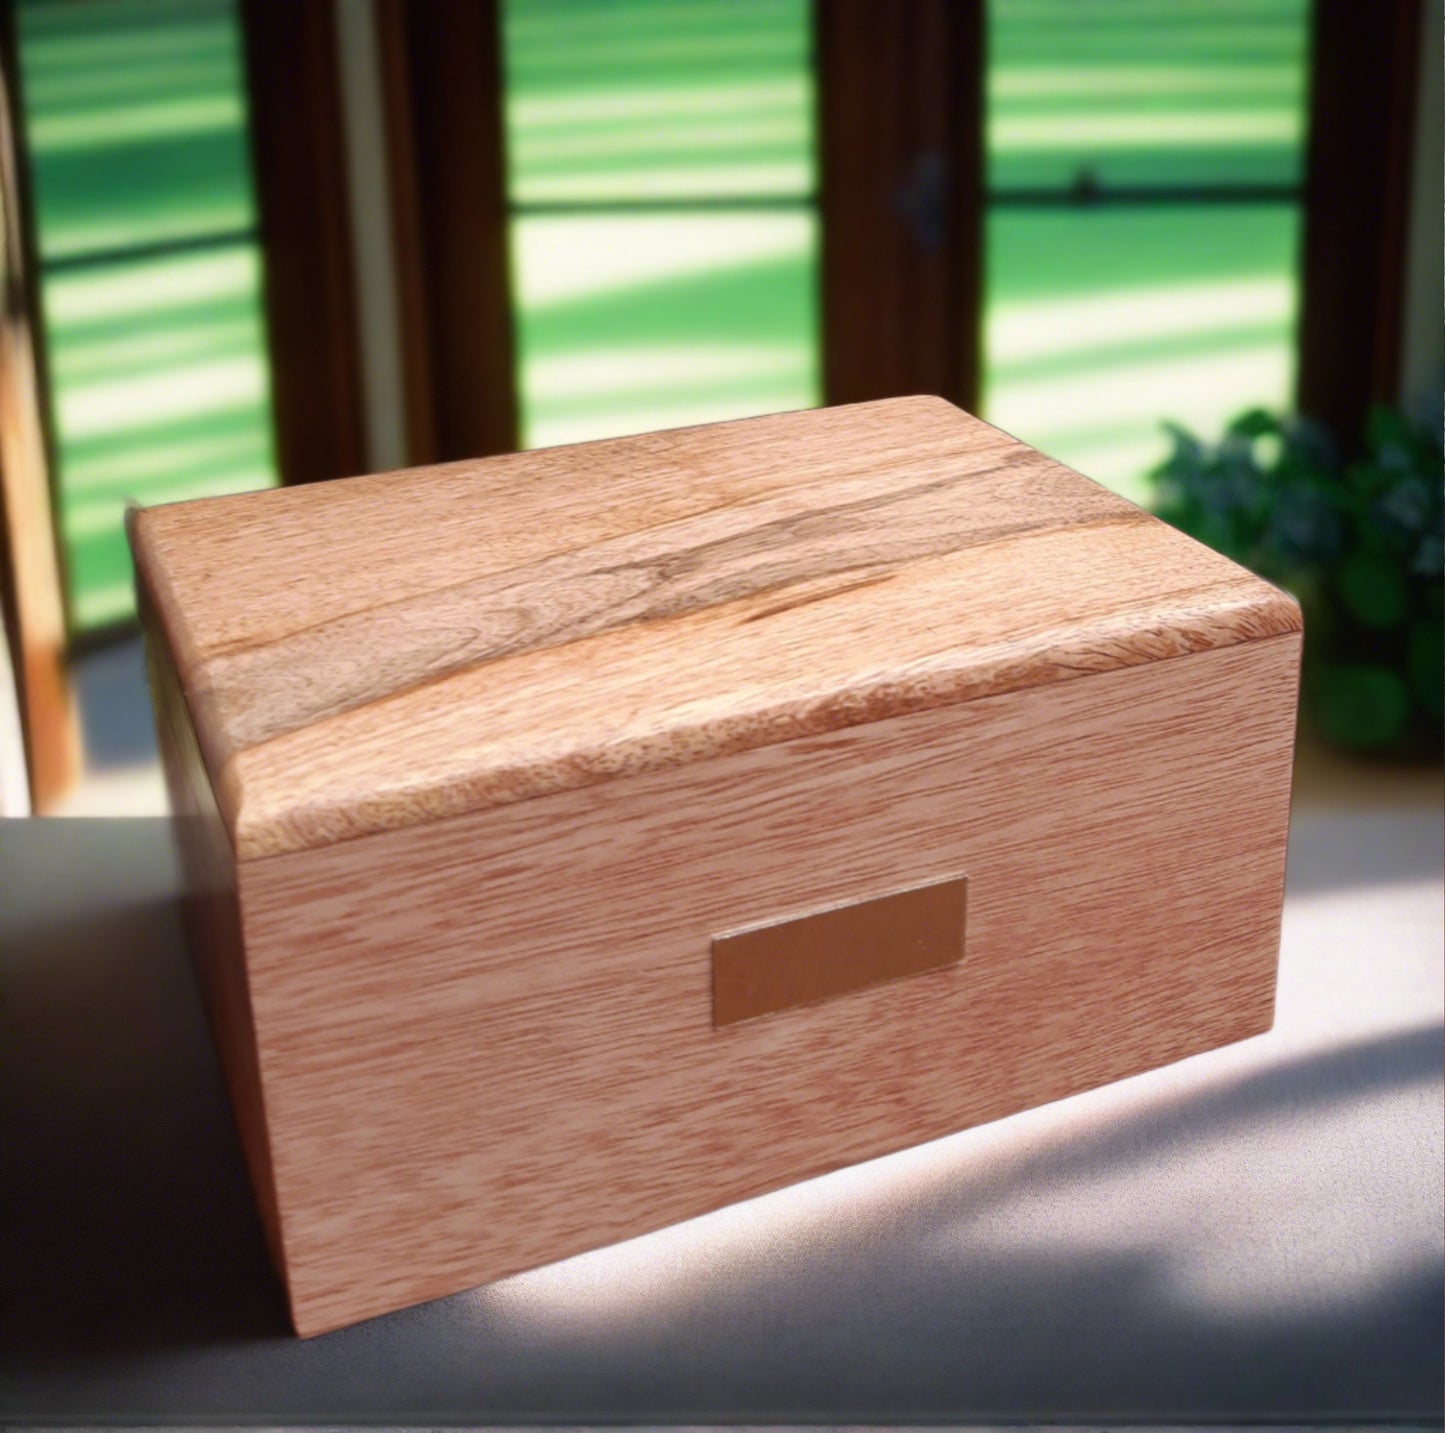 Large Wooden Pet Cremation Urn With Engraved Name Plate (light finish)